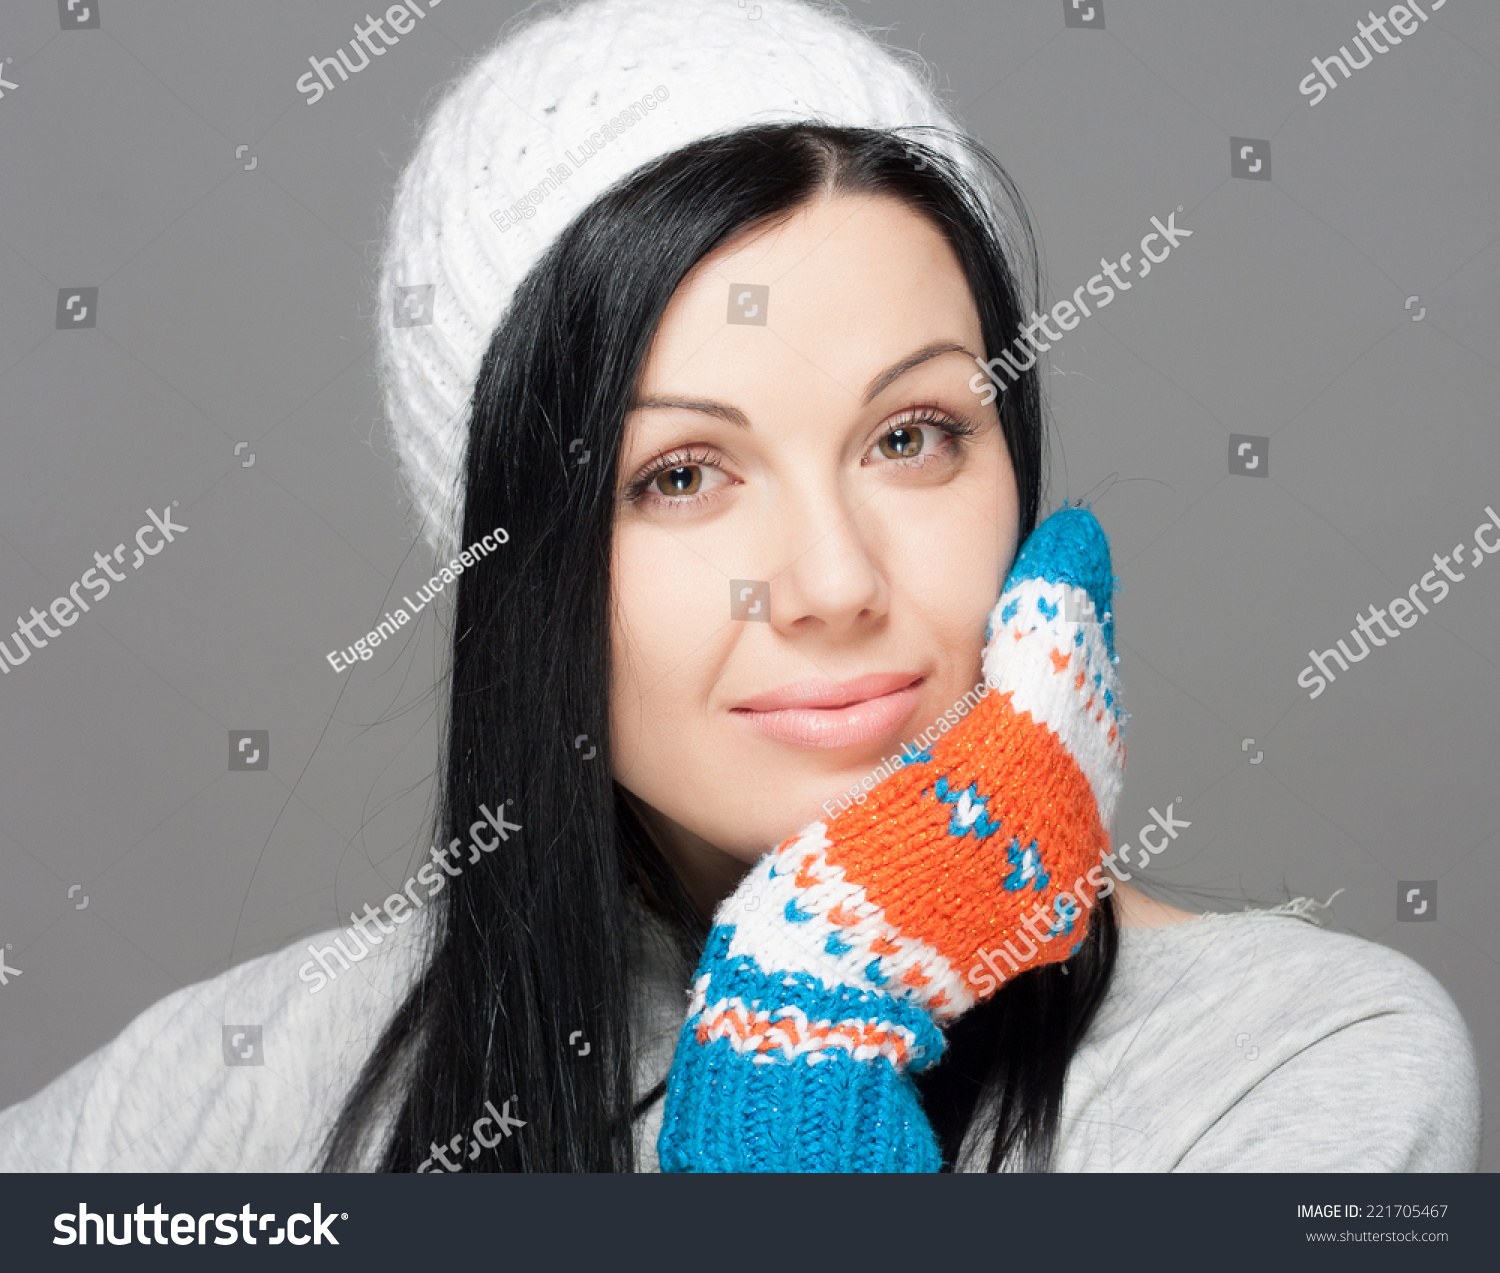 Winter Beauty Woman. Fashion Girl Concept. Skin and hair care in cold season. Beautiful woman with long hair wearing a sweater, scarf, hat and gloves. Holiday Fashion Portrait. #221705467